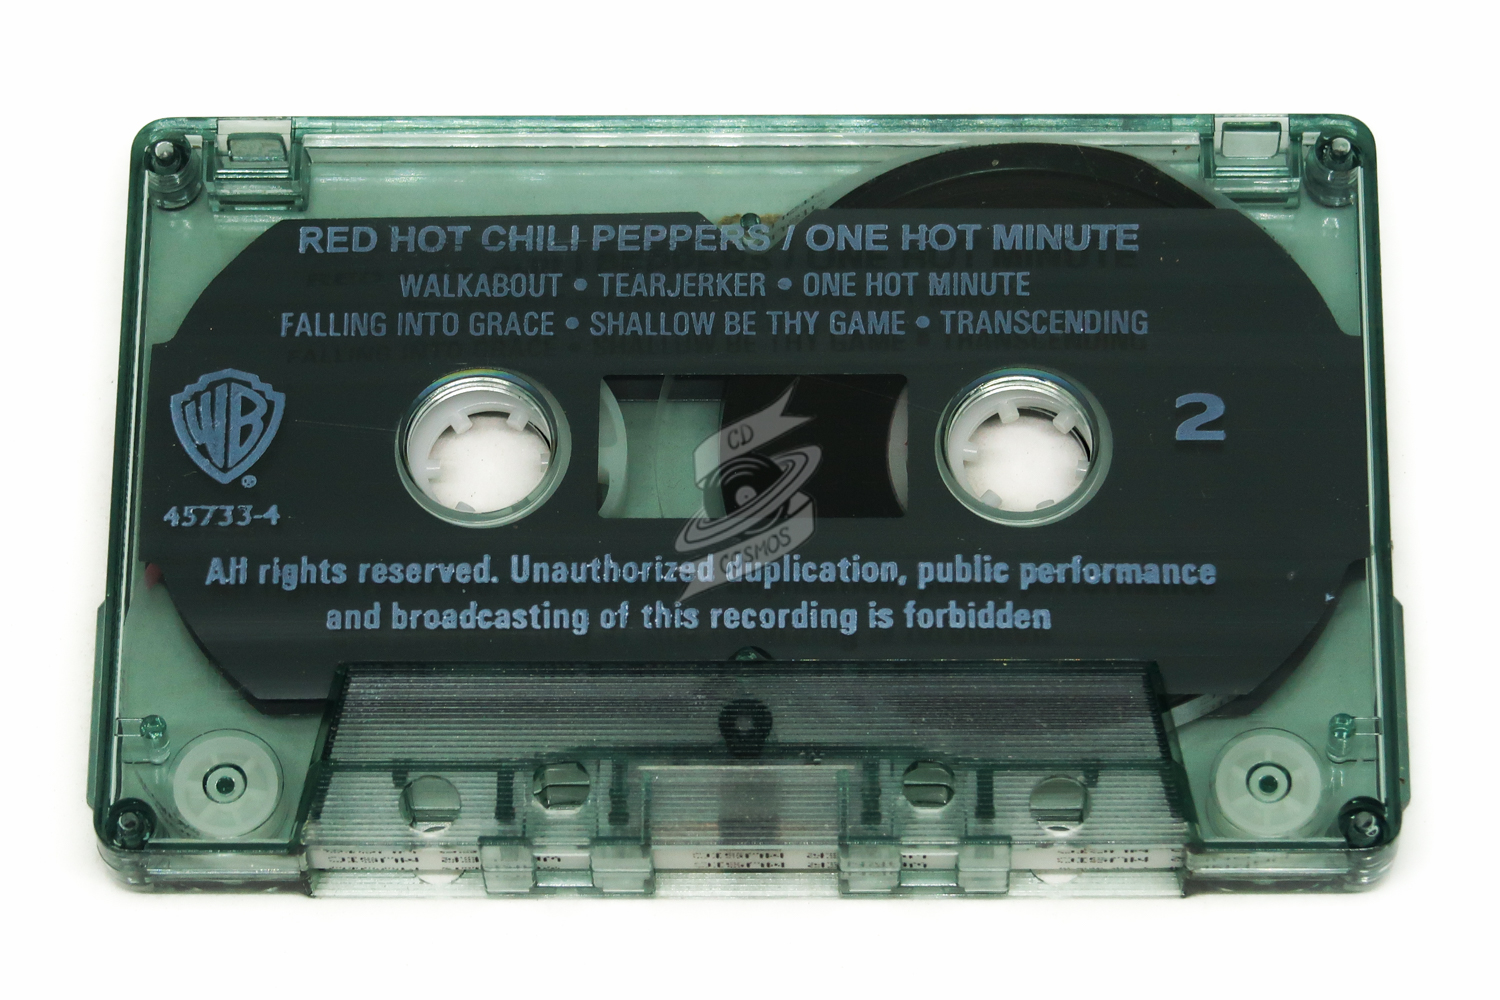 The Red Hot Chili Peppers‎‎‎ One Hot - cdcosmos